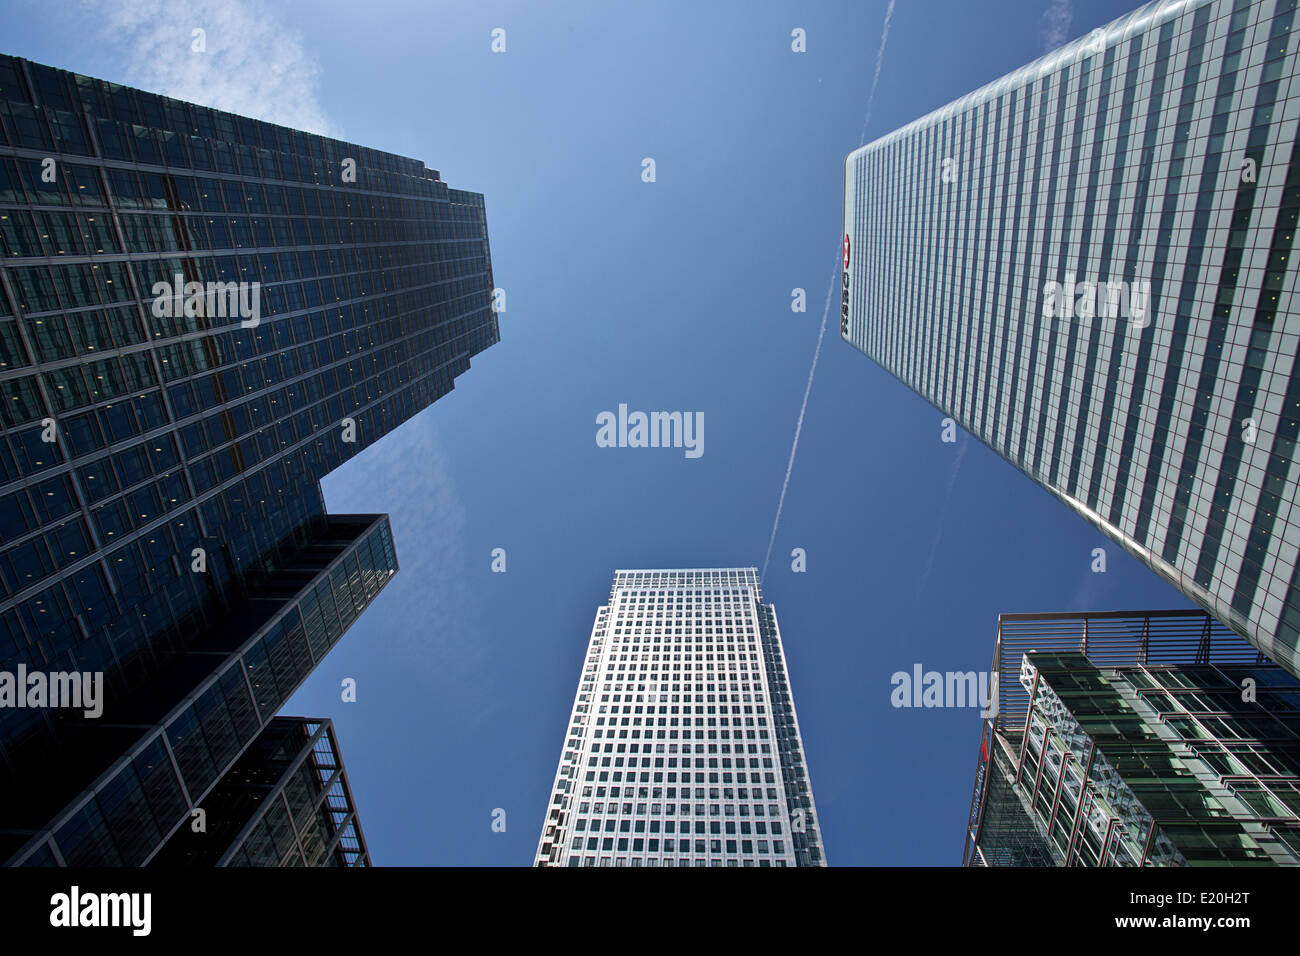 Canary Wharf district of London. Financial district. Stock Photo